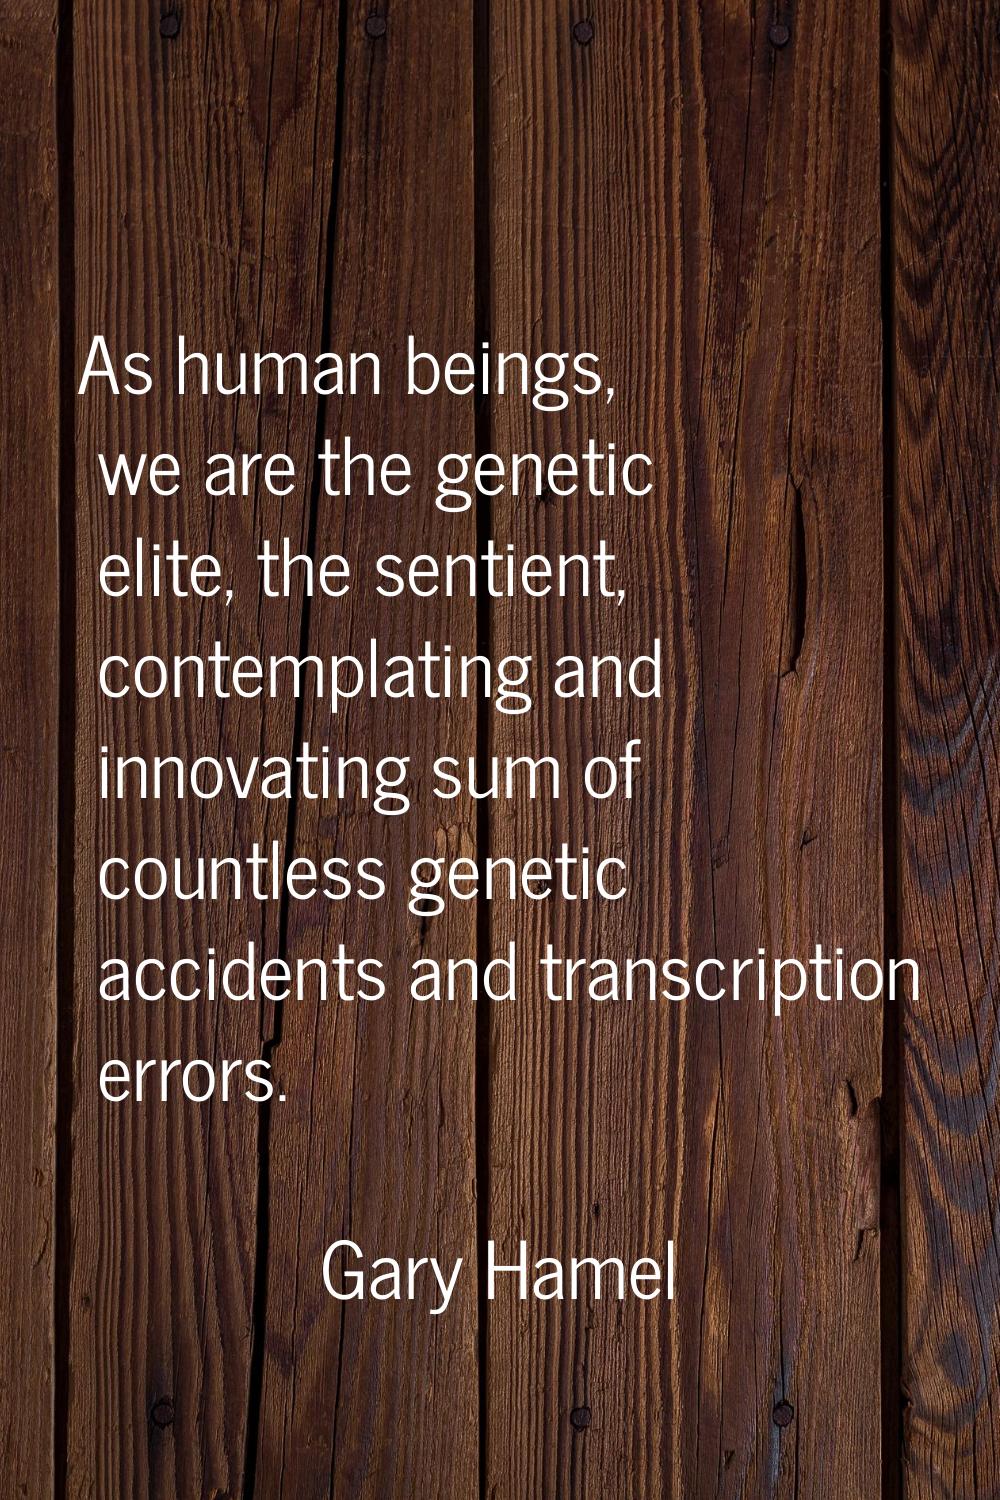 As human beings, we are the genetic elite, the sentient, contemplating and innovating sum of countl